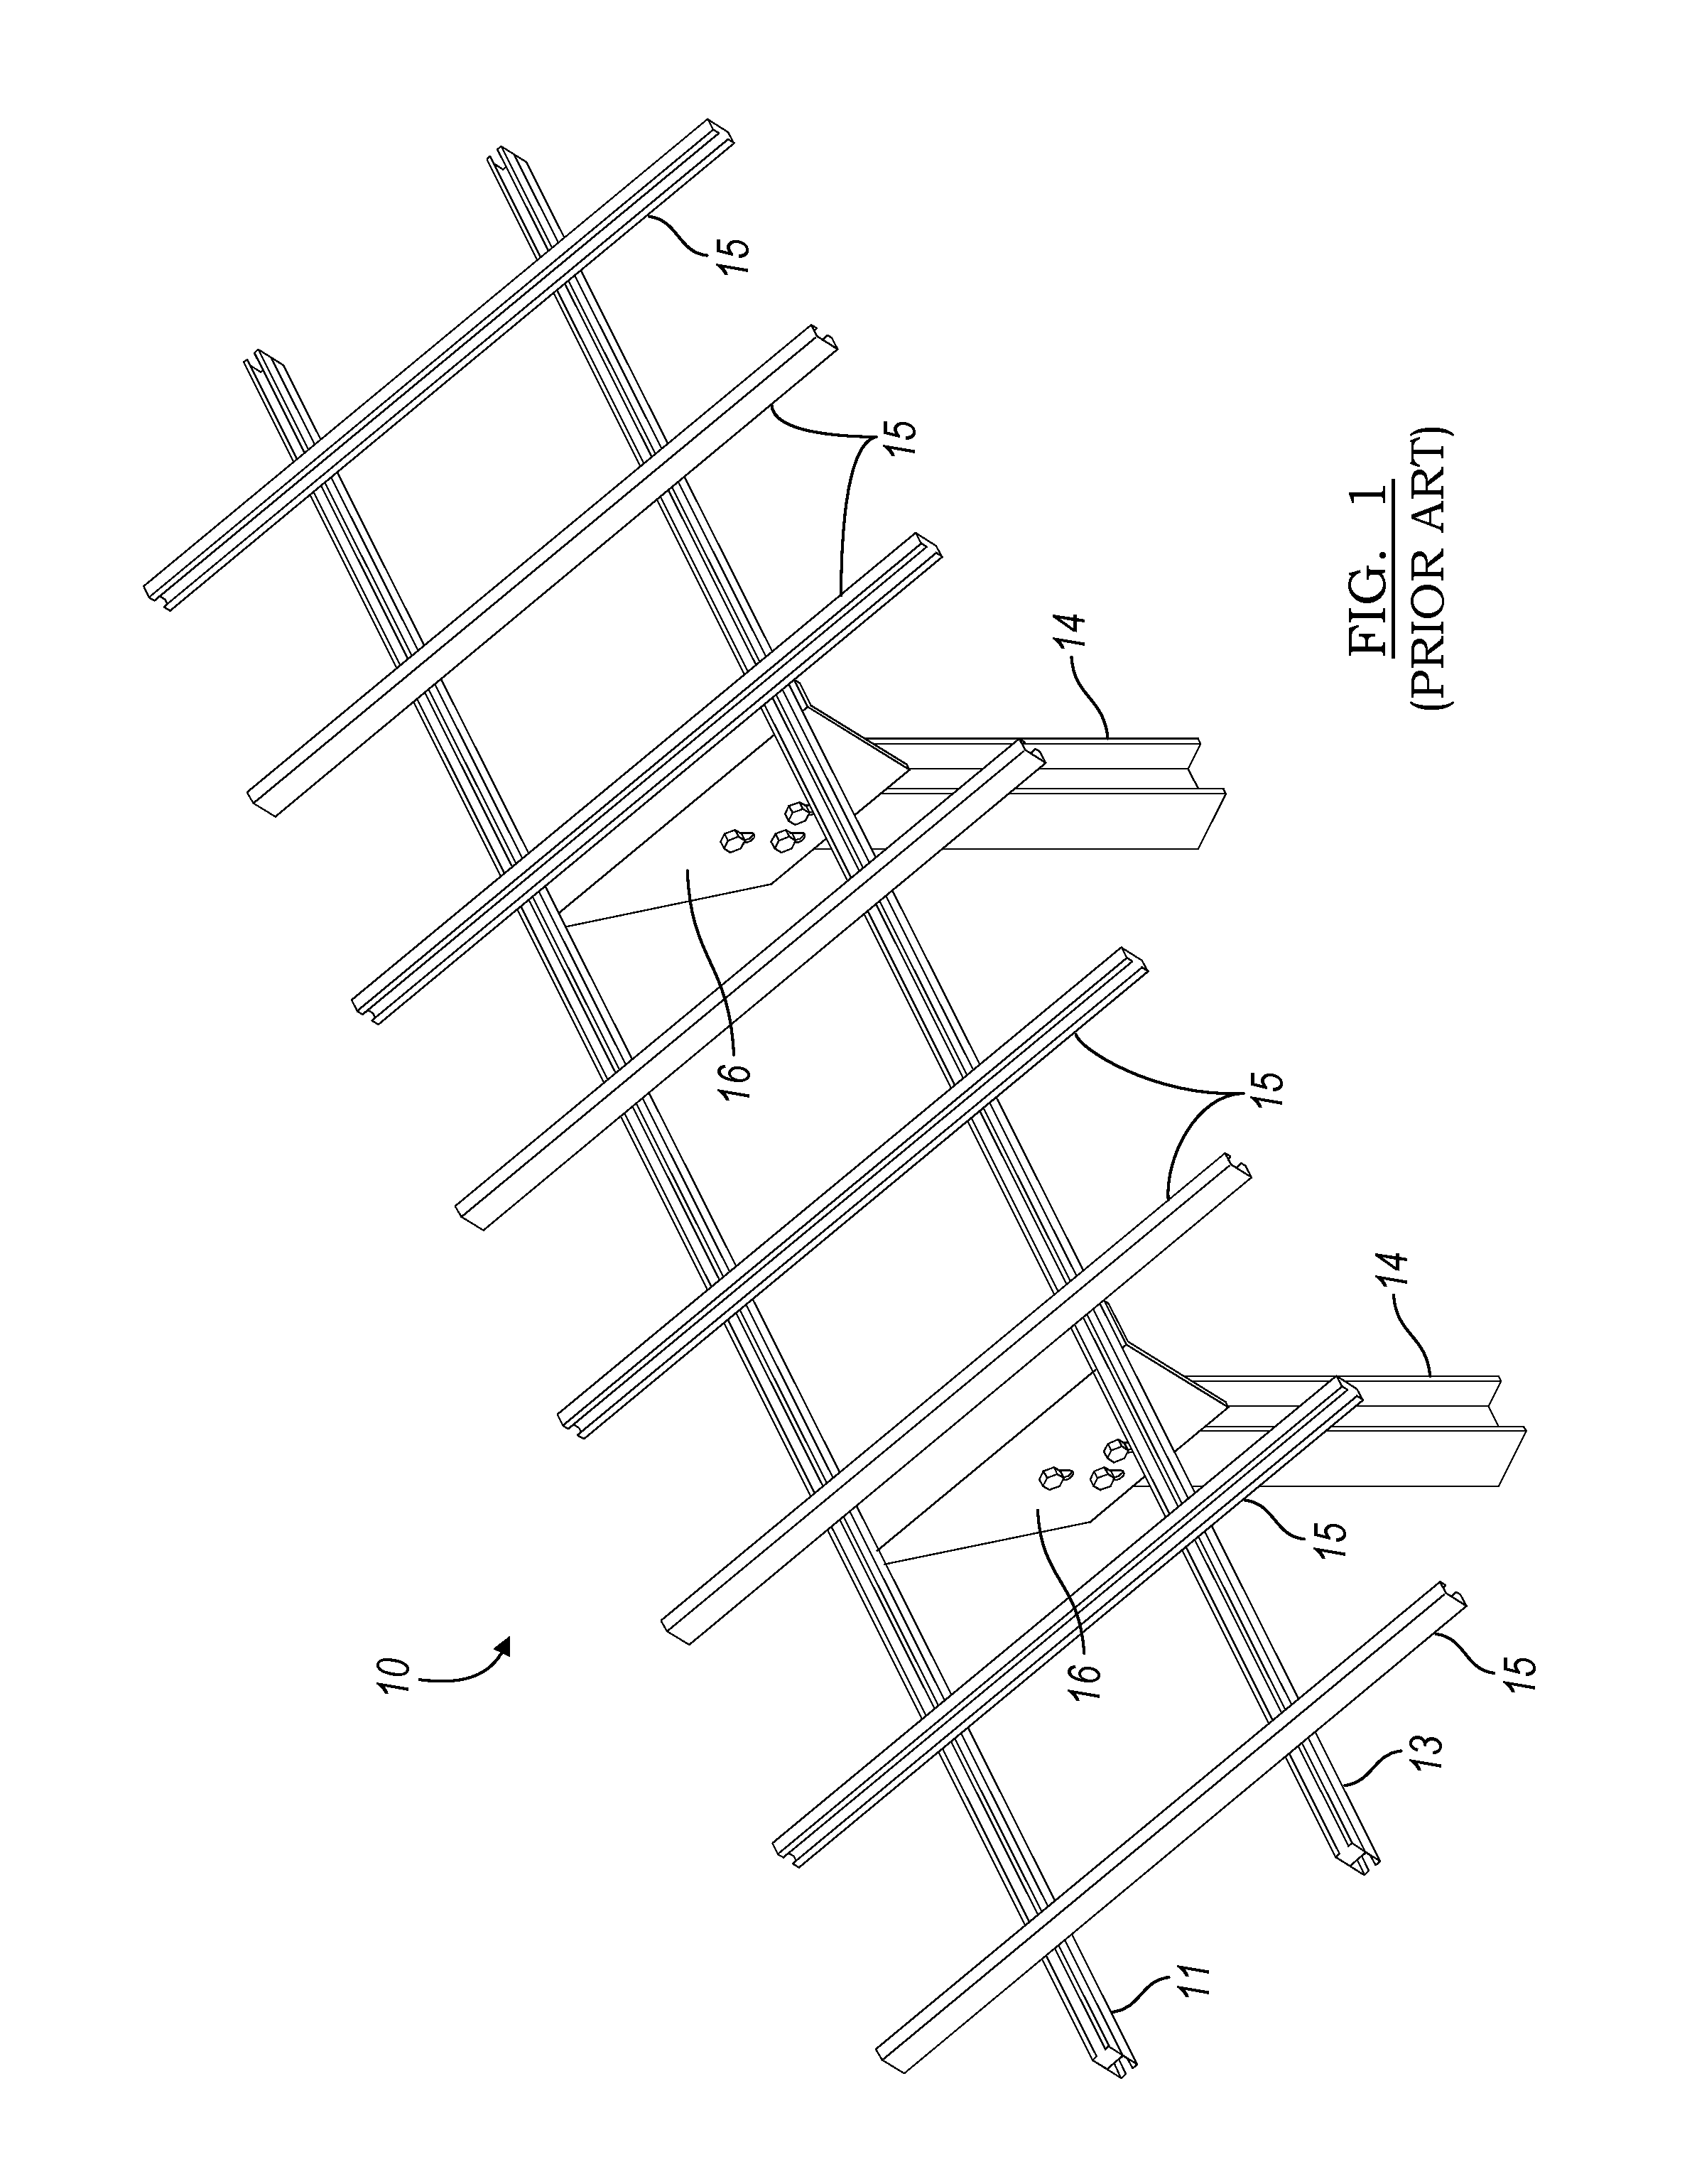 Support system for solar panels